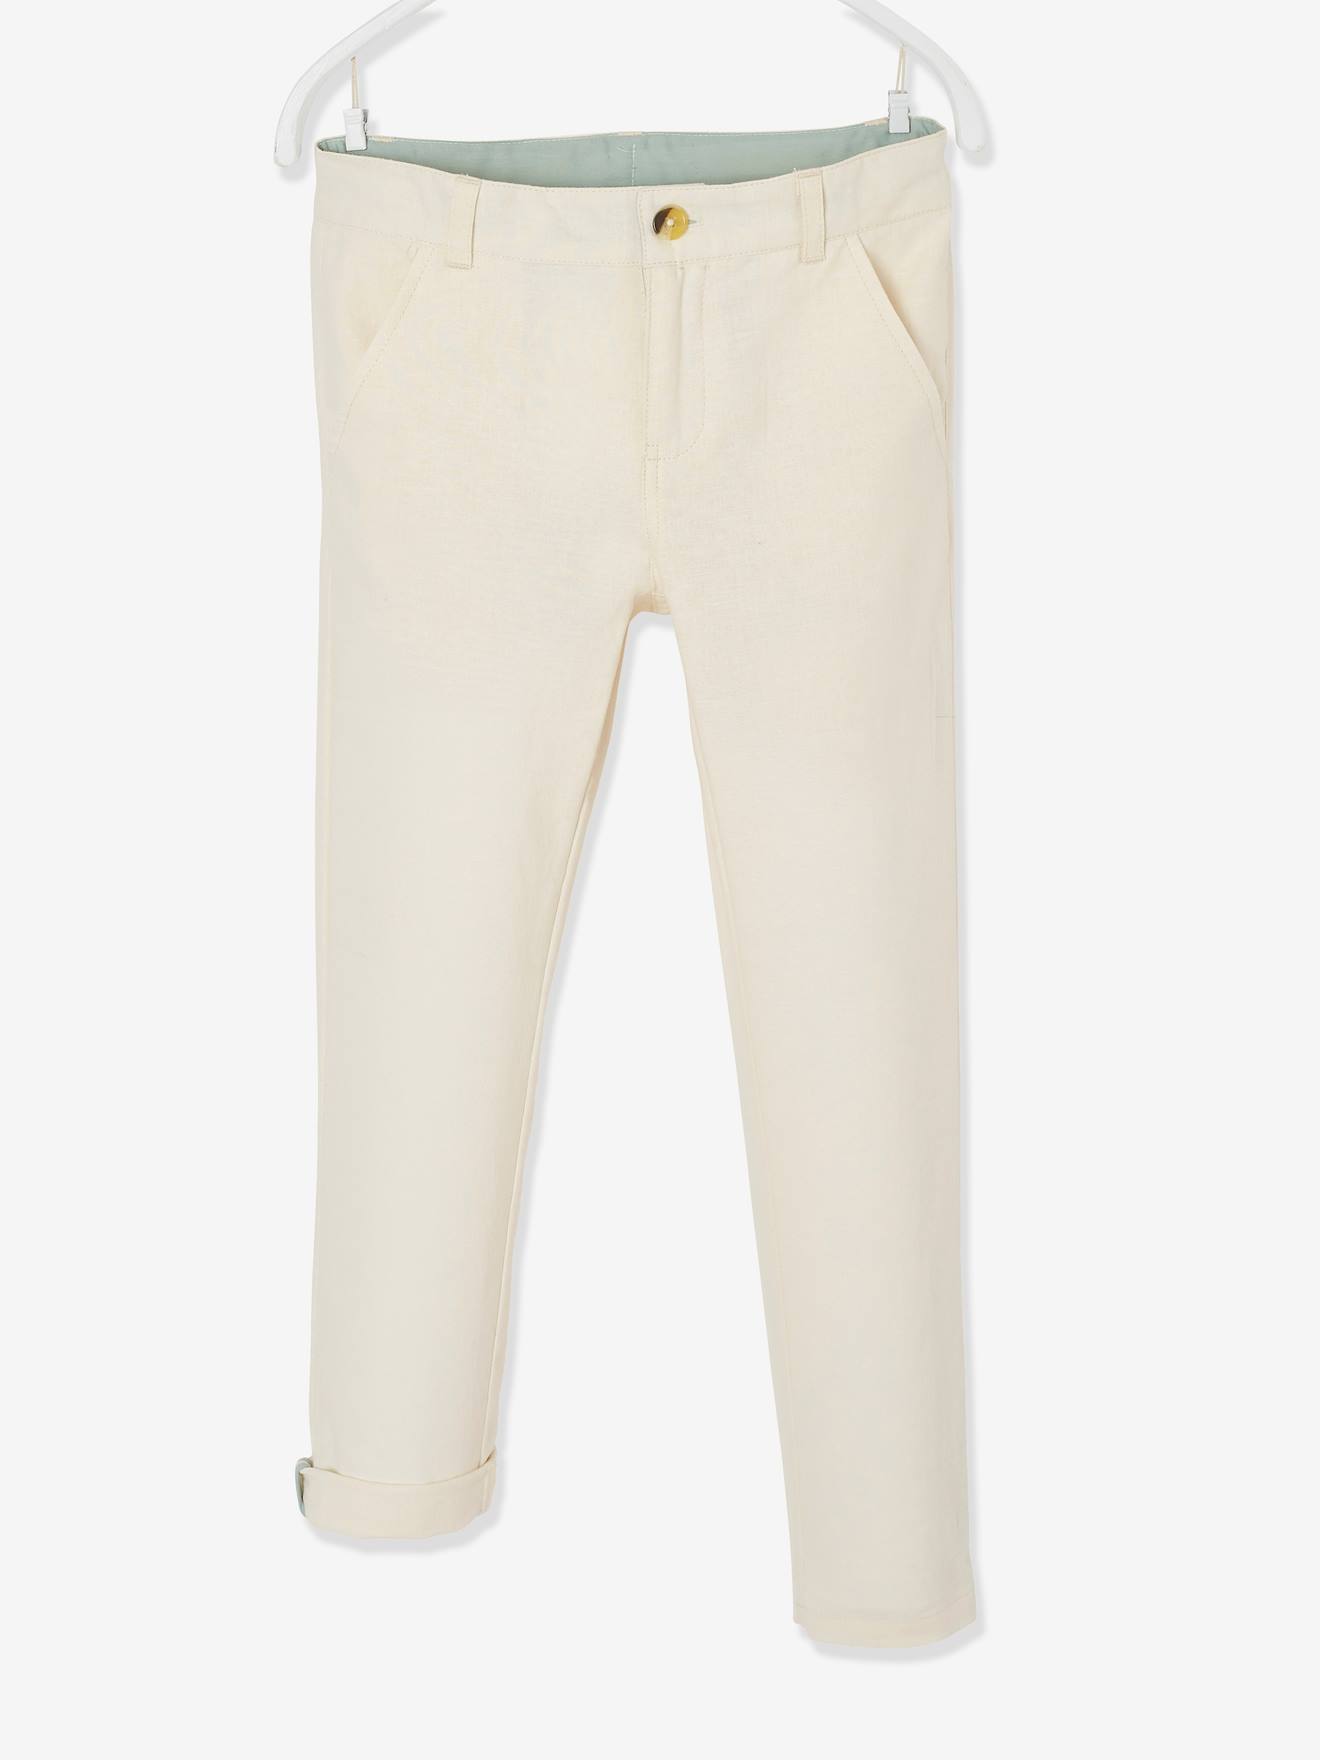 LINEN TROUSERS Color beige  RESERVED  3596S80X